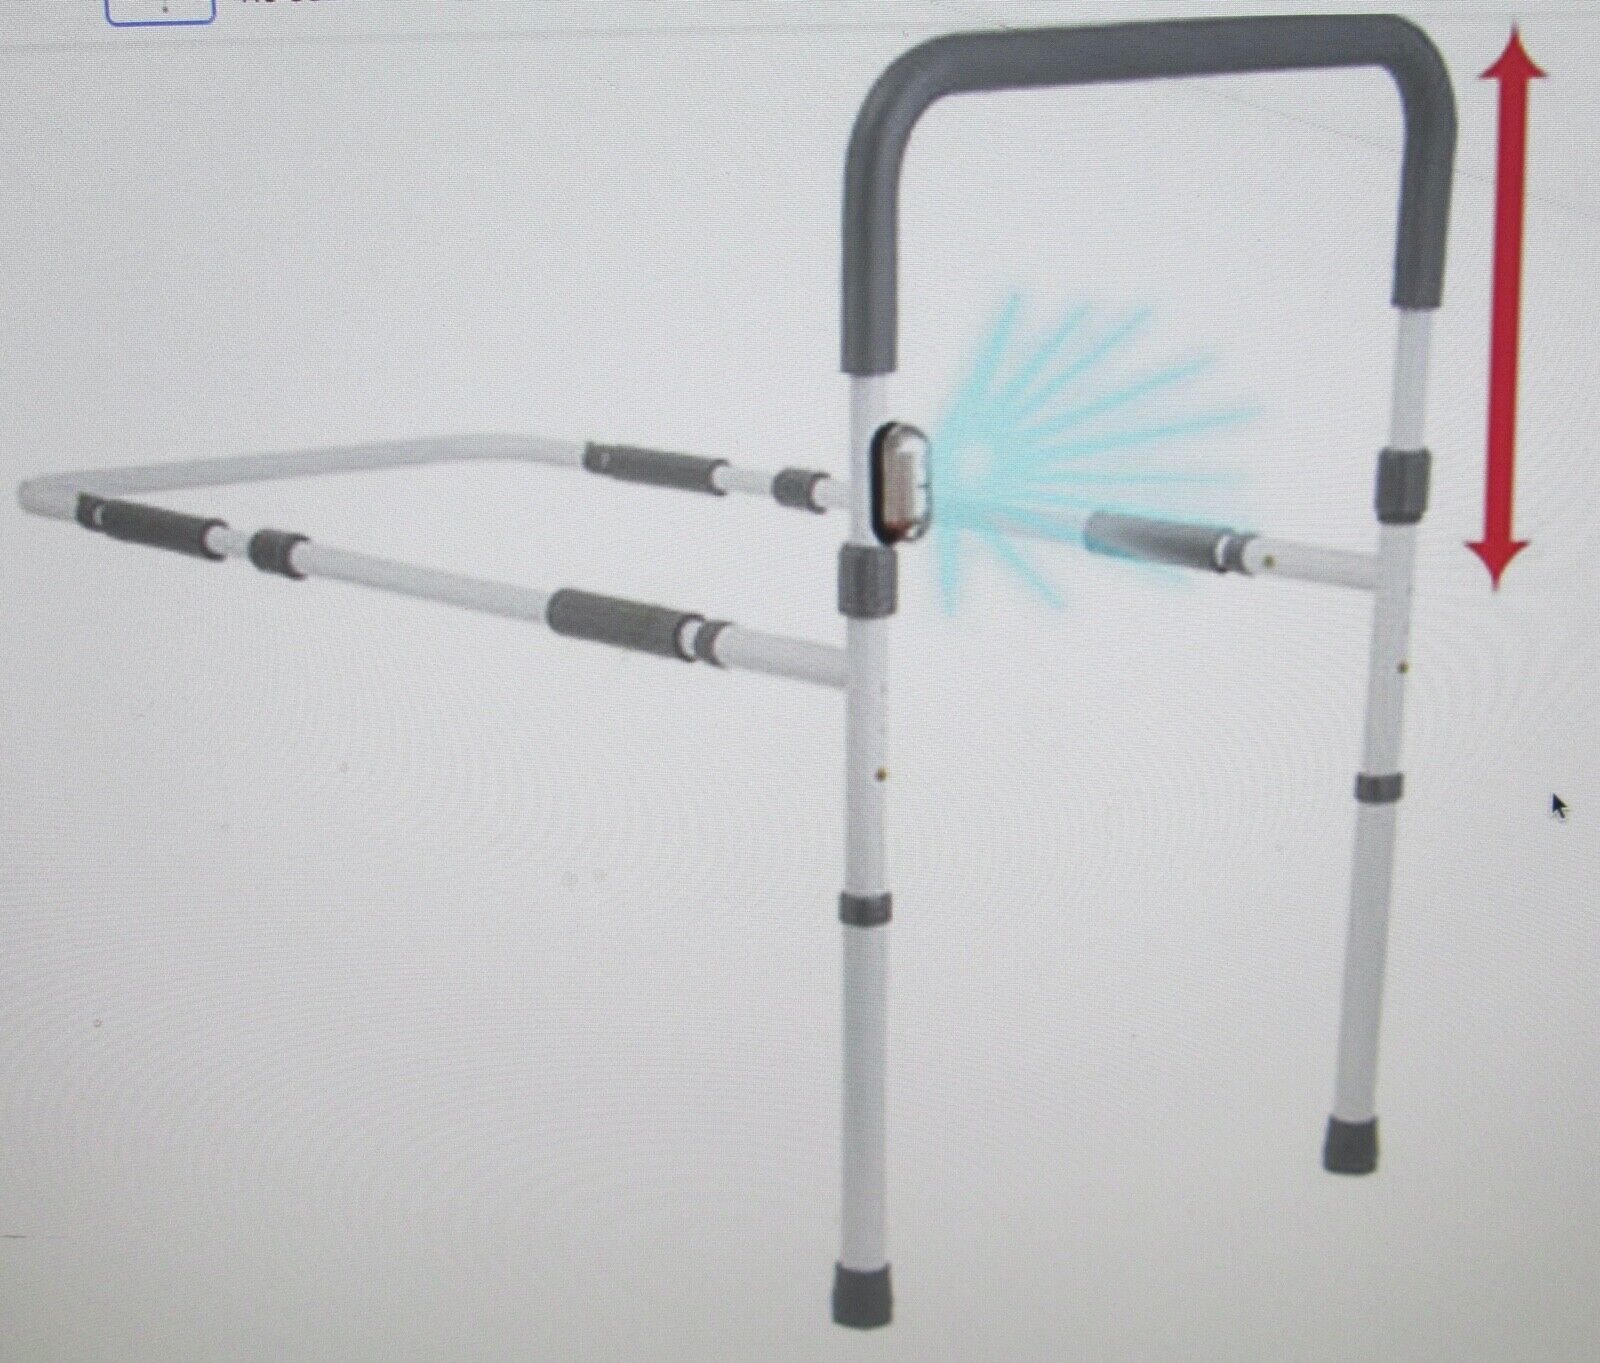 Primary image for Platinum Health LumaRail Bed Assist Rail #R3 With LED Light - New